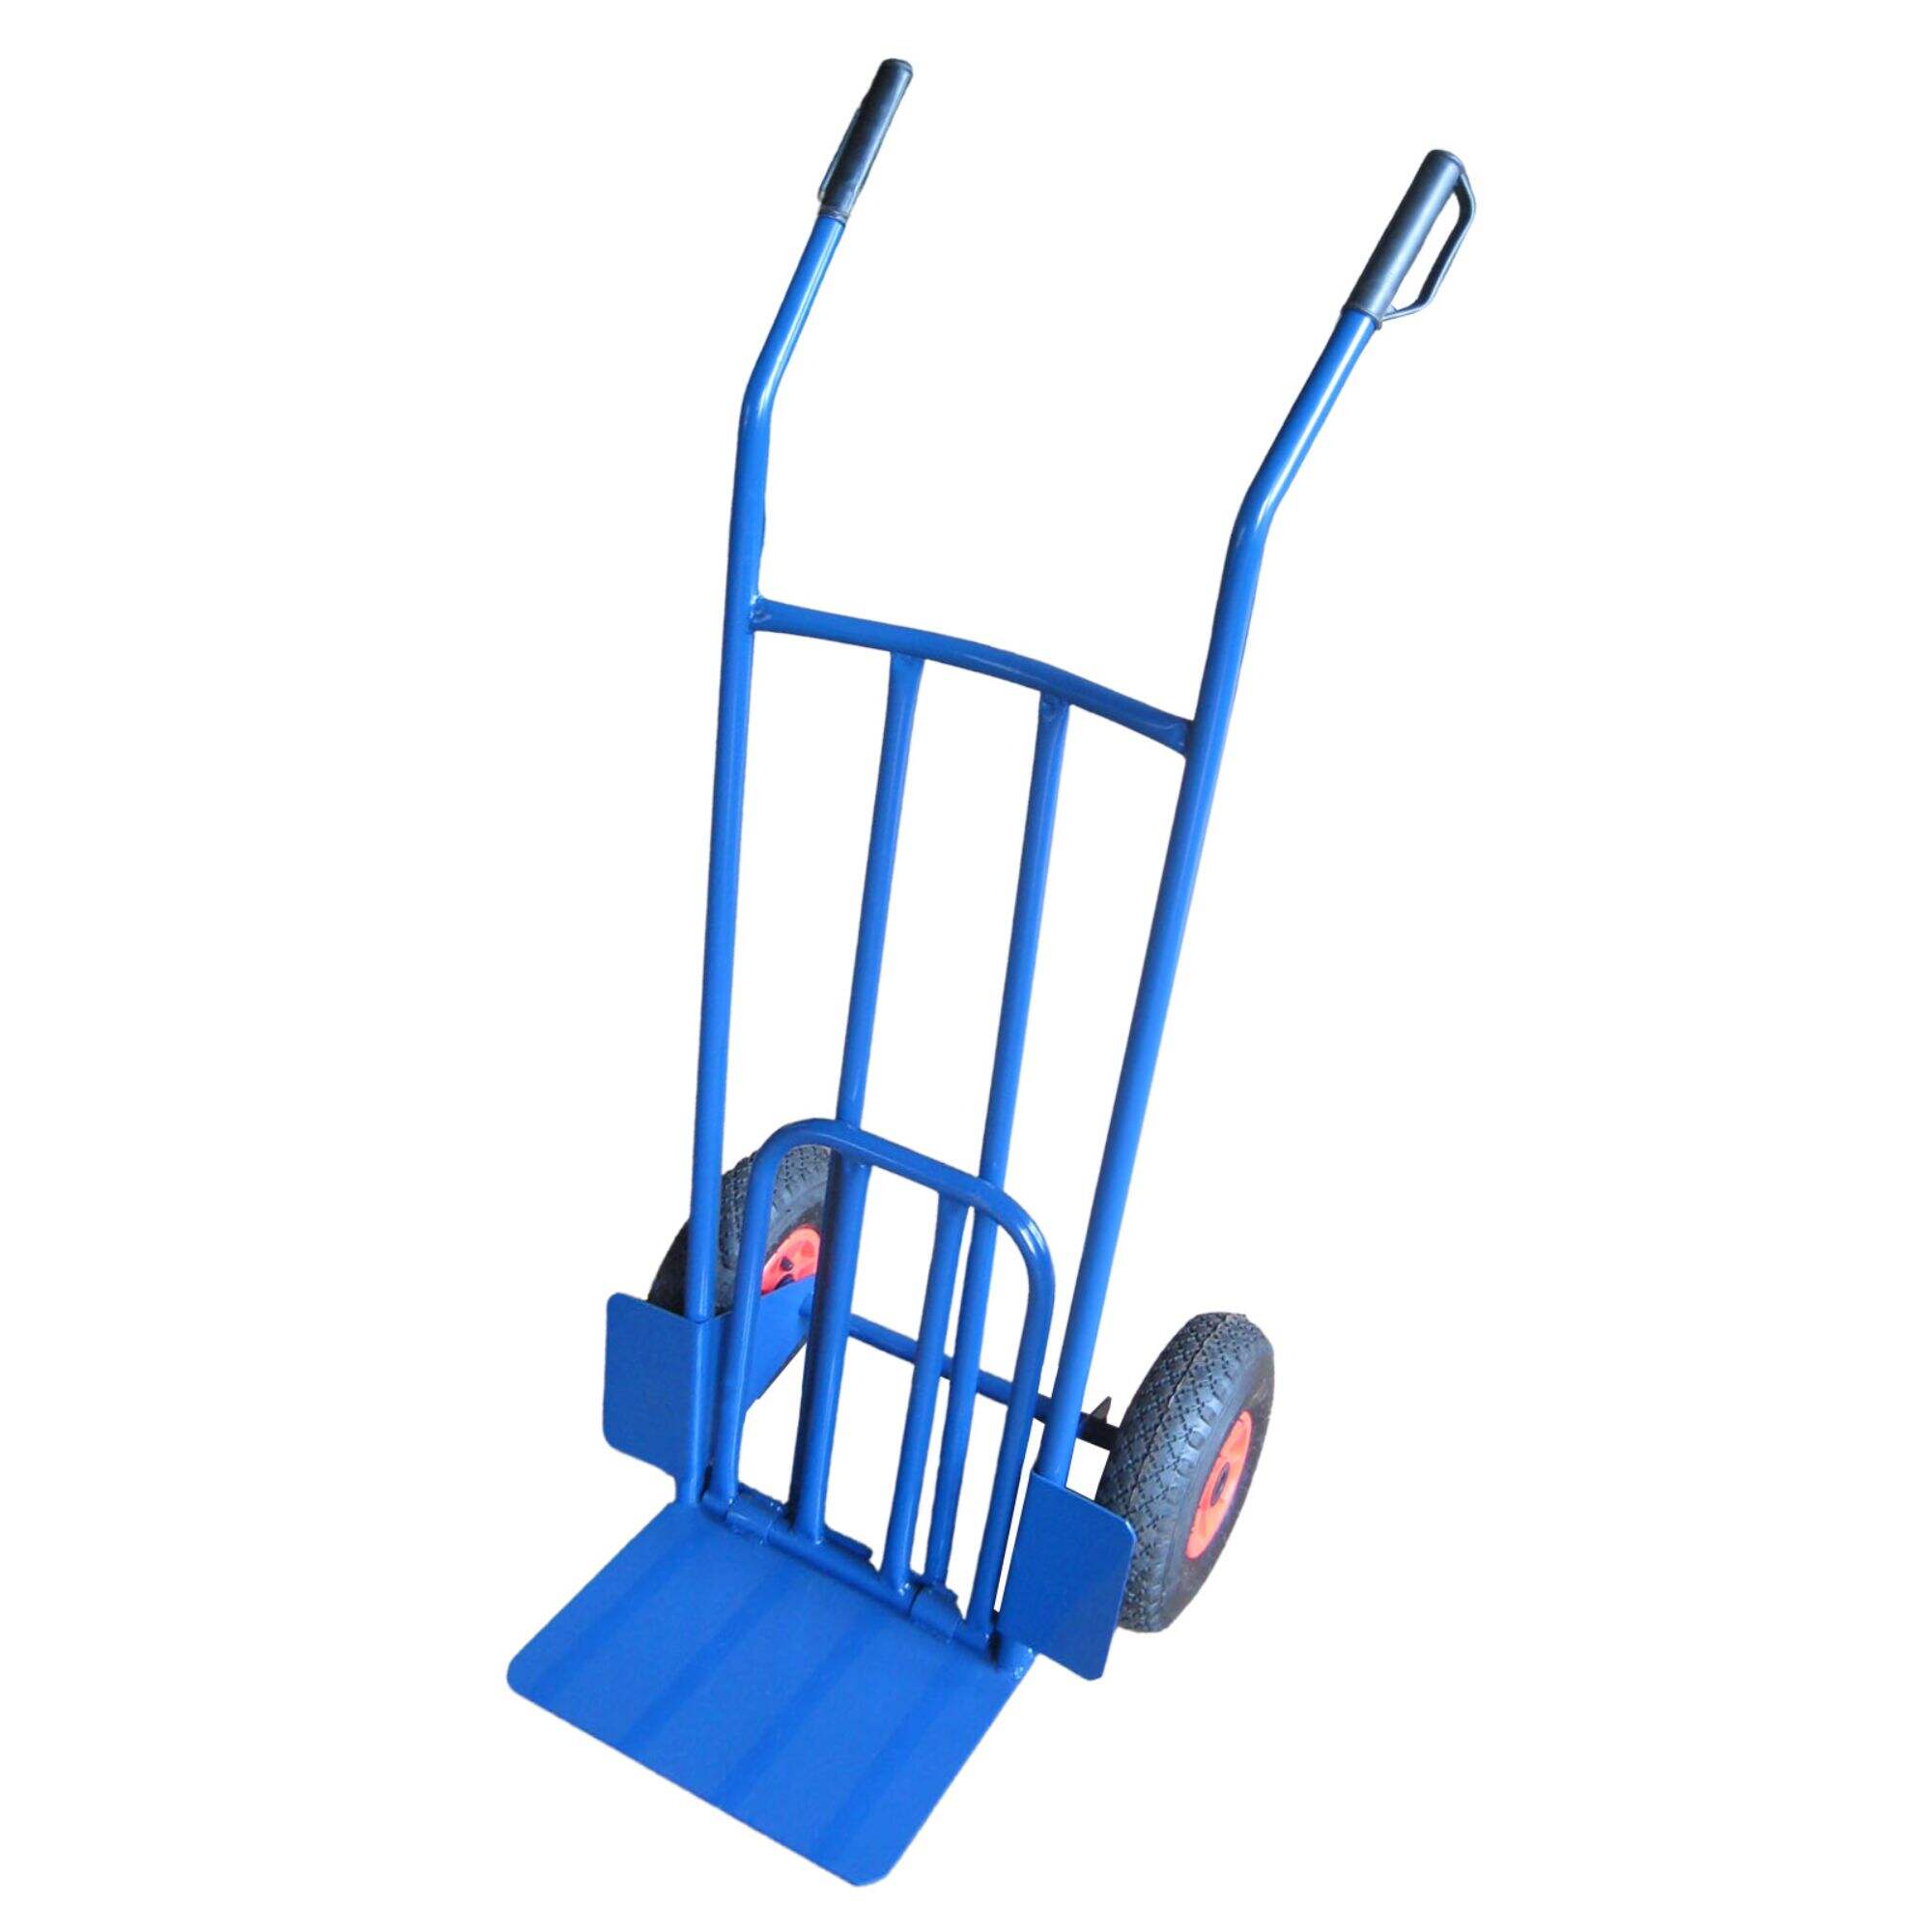 HT1893 Steel Hand Truck, Hand Cart Trolley Dolly, with 3.00-4 Pneumatic Wheel